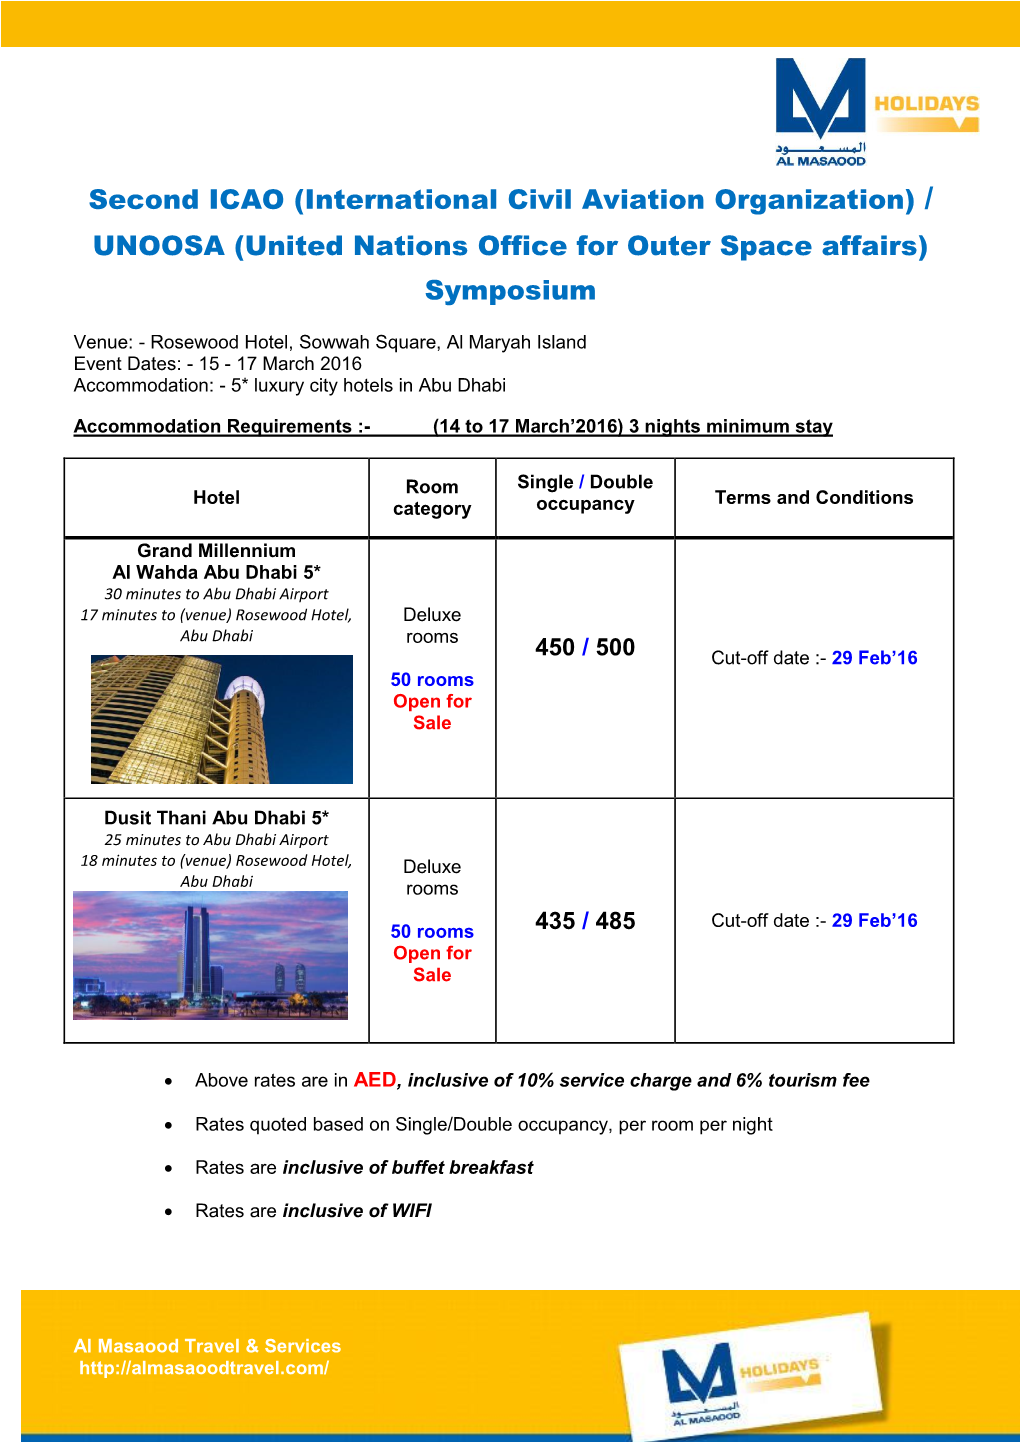 Second ICAO (International Civil Aviation Organization) / UNOOSA (United Nations Office for Outer Space Affairs) Symposium